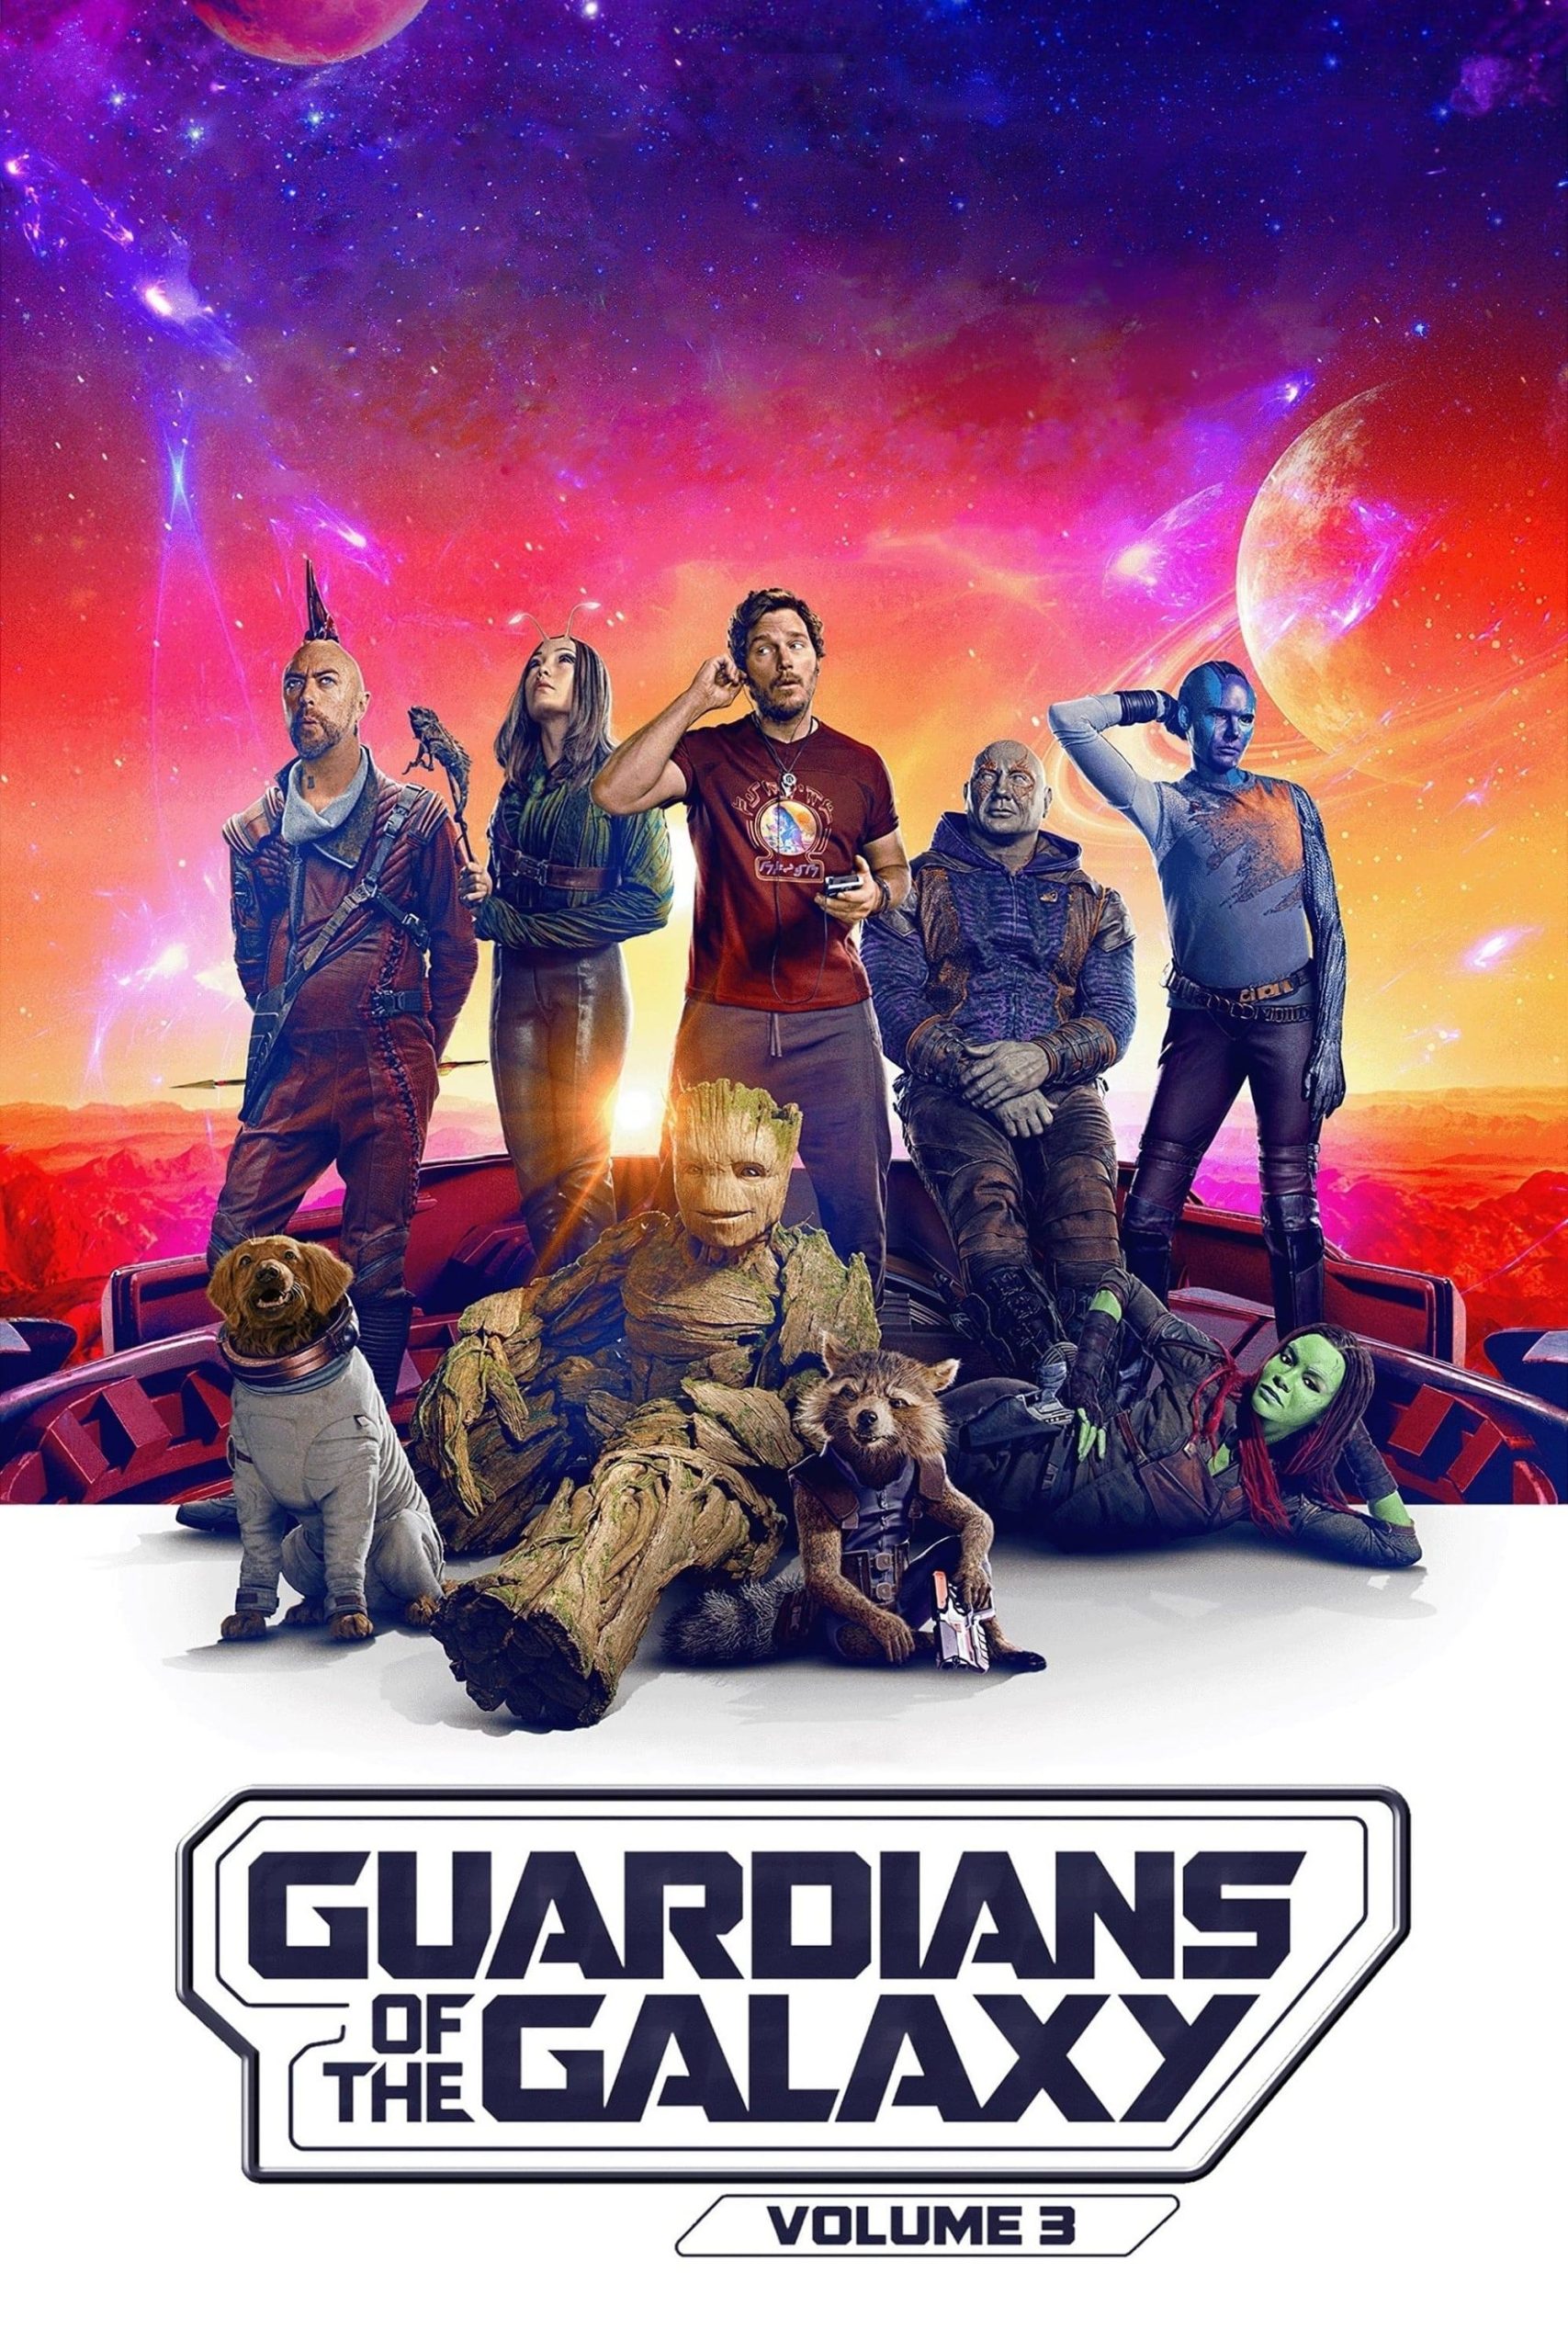 Guardians Of The Galaxy Poster 2023 Free Desktop Wallpaper, Guardians Of The Galaxy Poster 2023, Movies